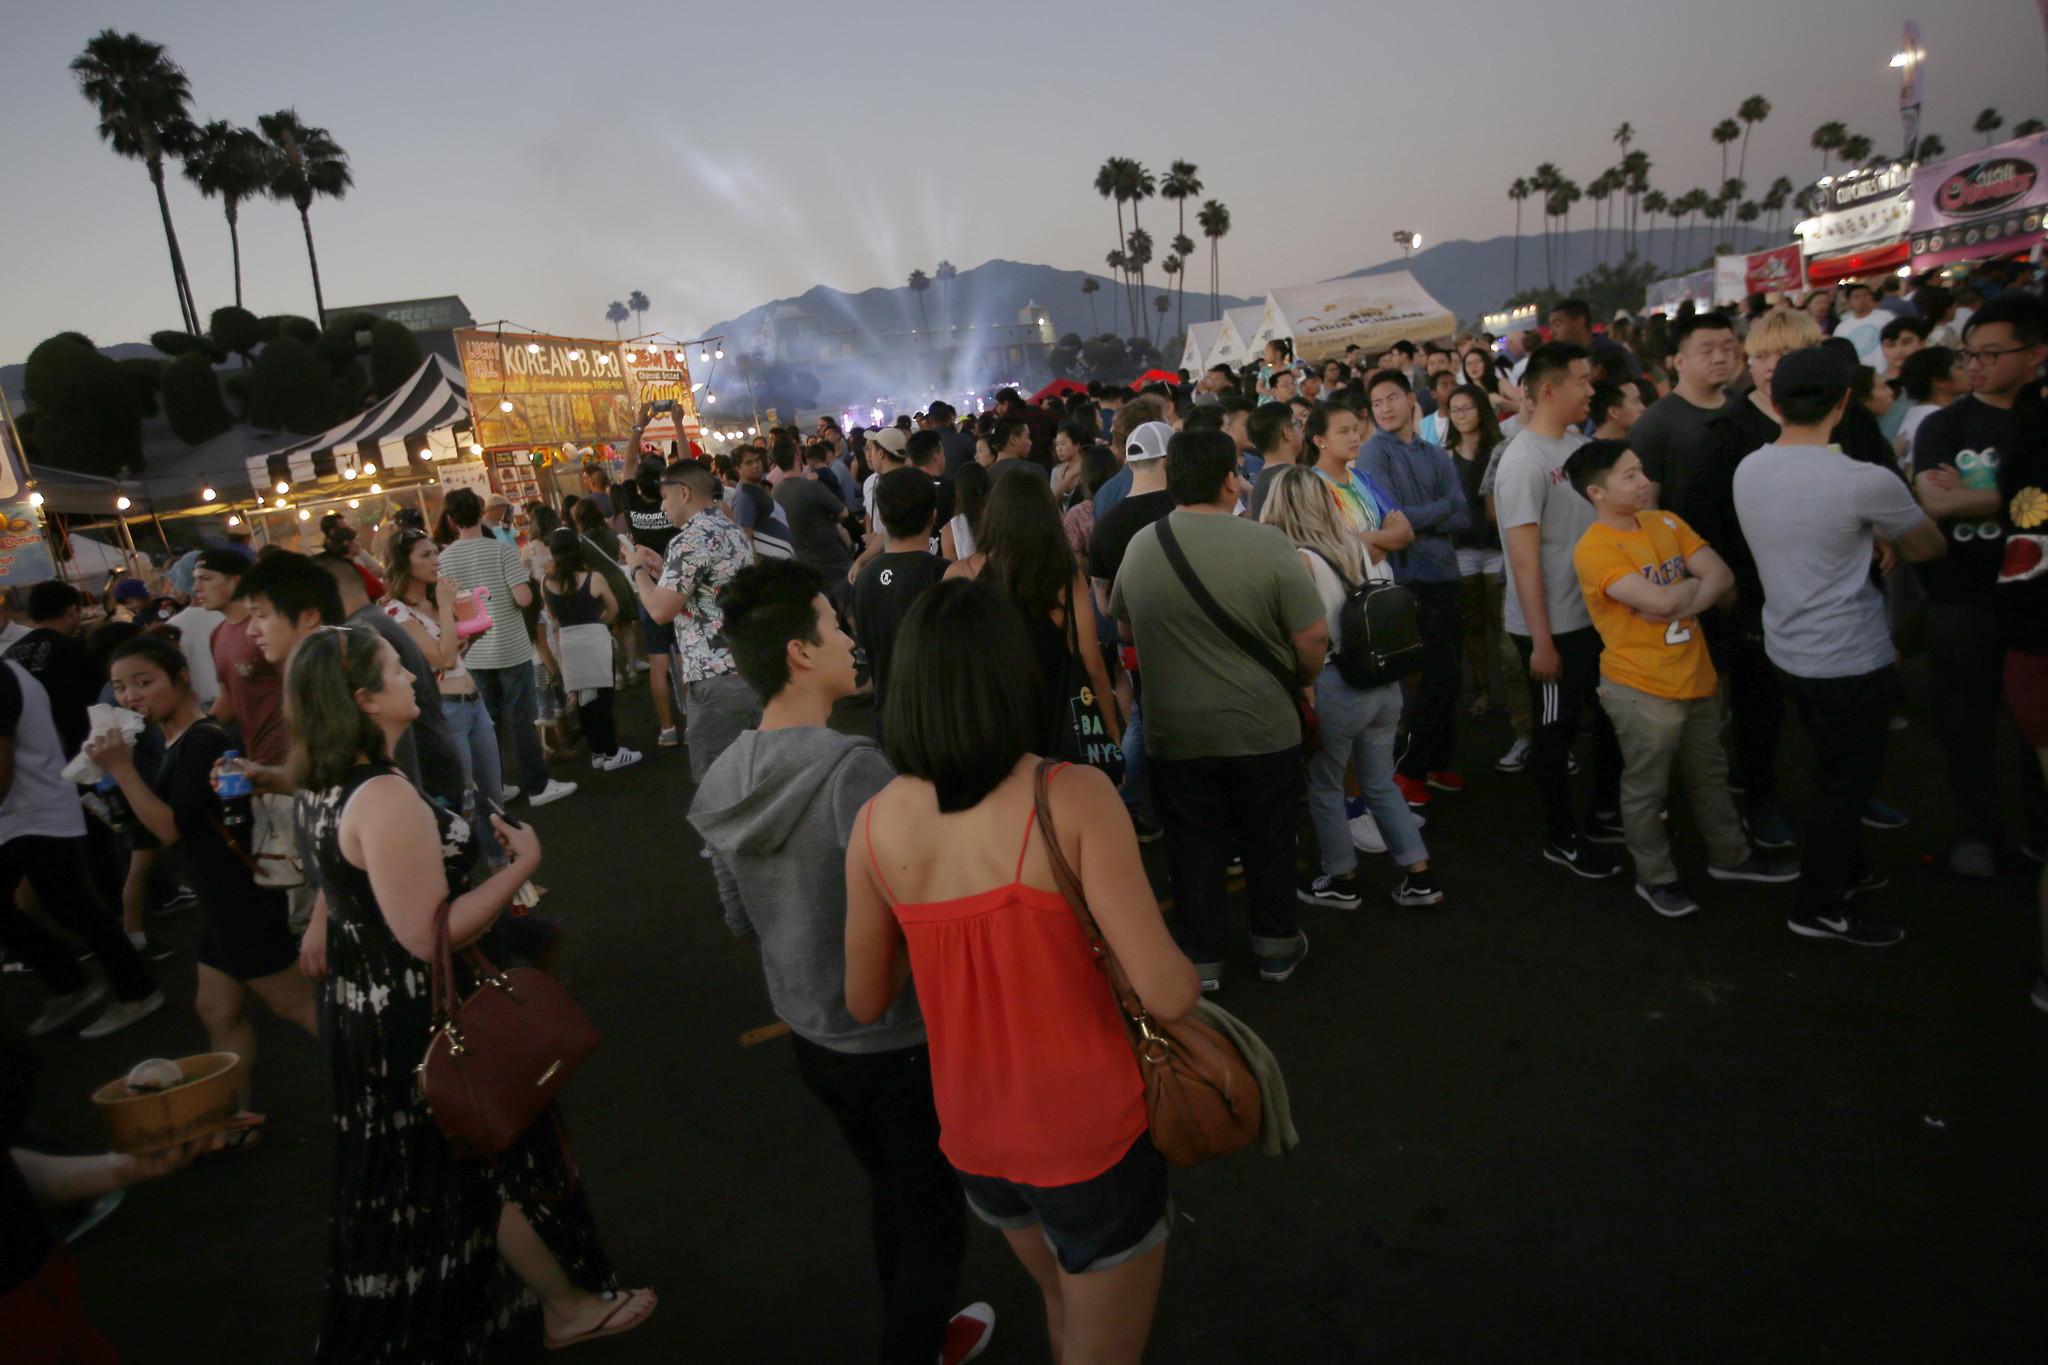 A large crowd attends the 626 Night Market in Arcadia during its opening weekend in 2017.